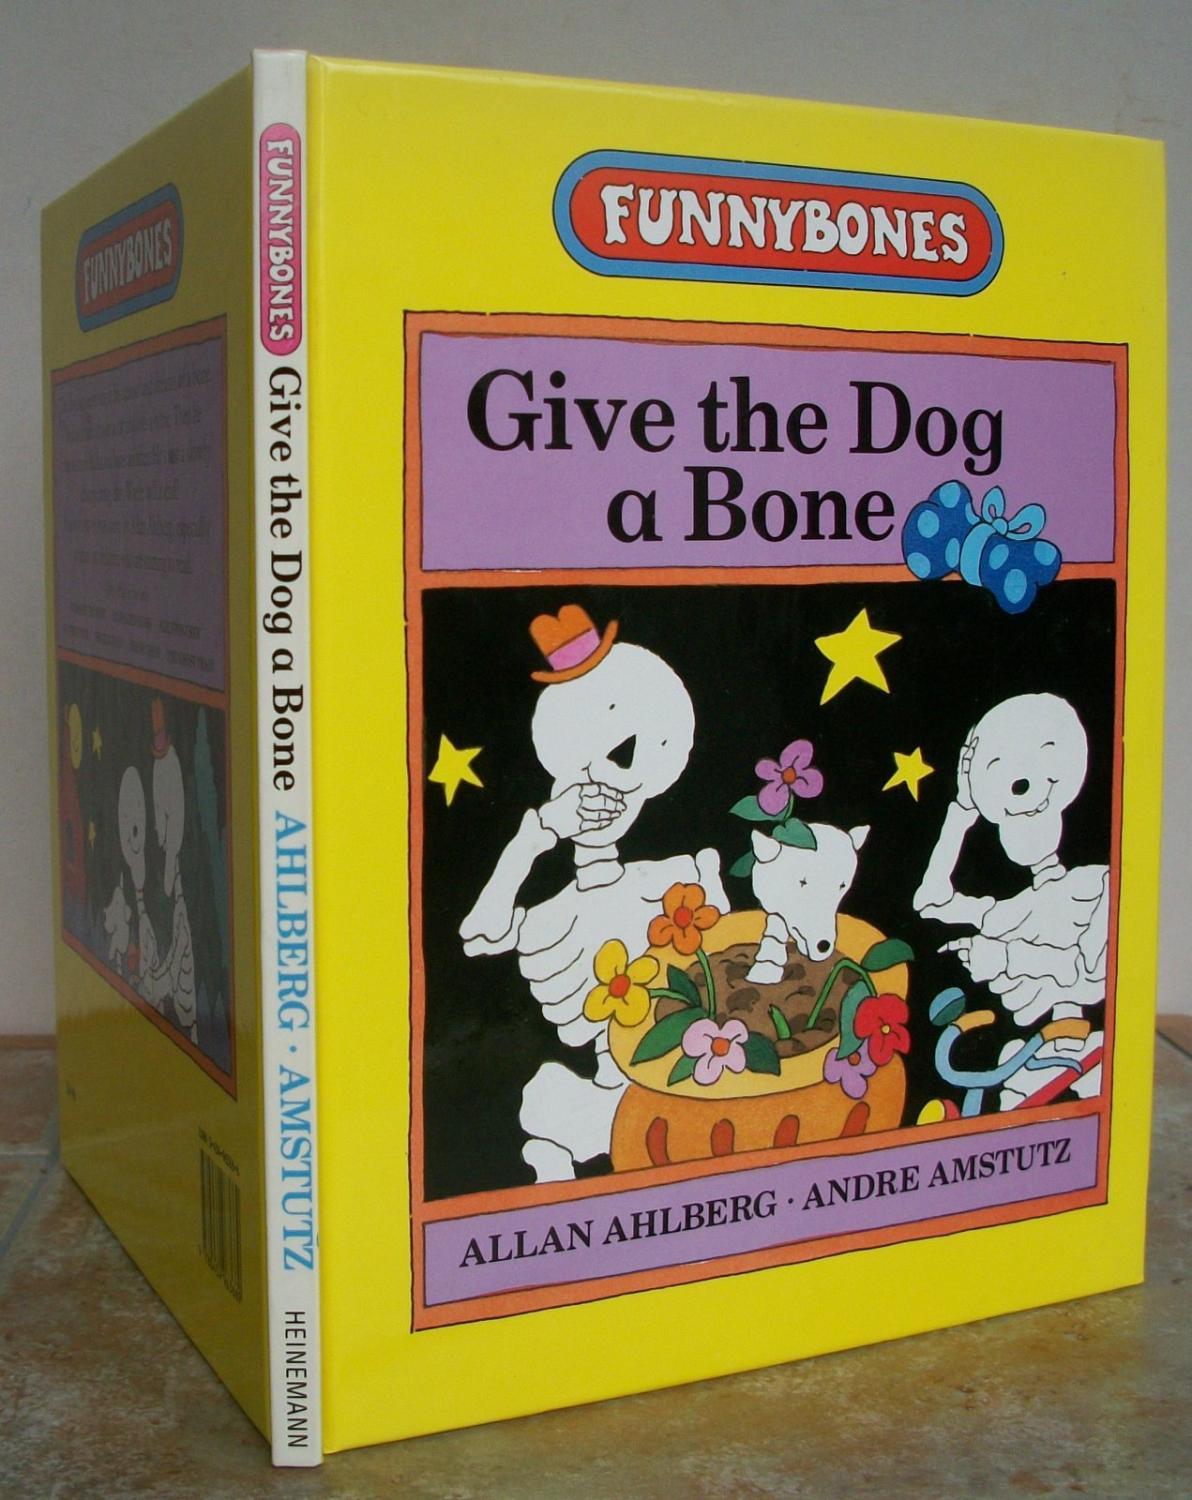 GIVE THE DOG A BONE. Funnybones series. by AHLBERG, ALLAN and ANDRE AMSTUTZ. (1993) Roger